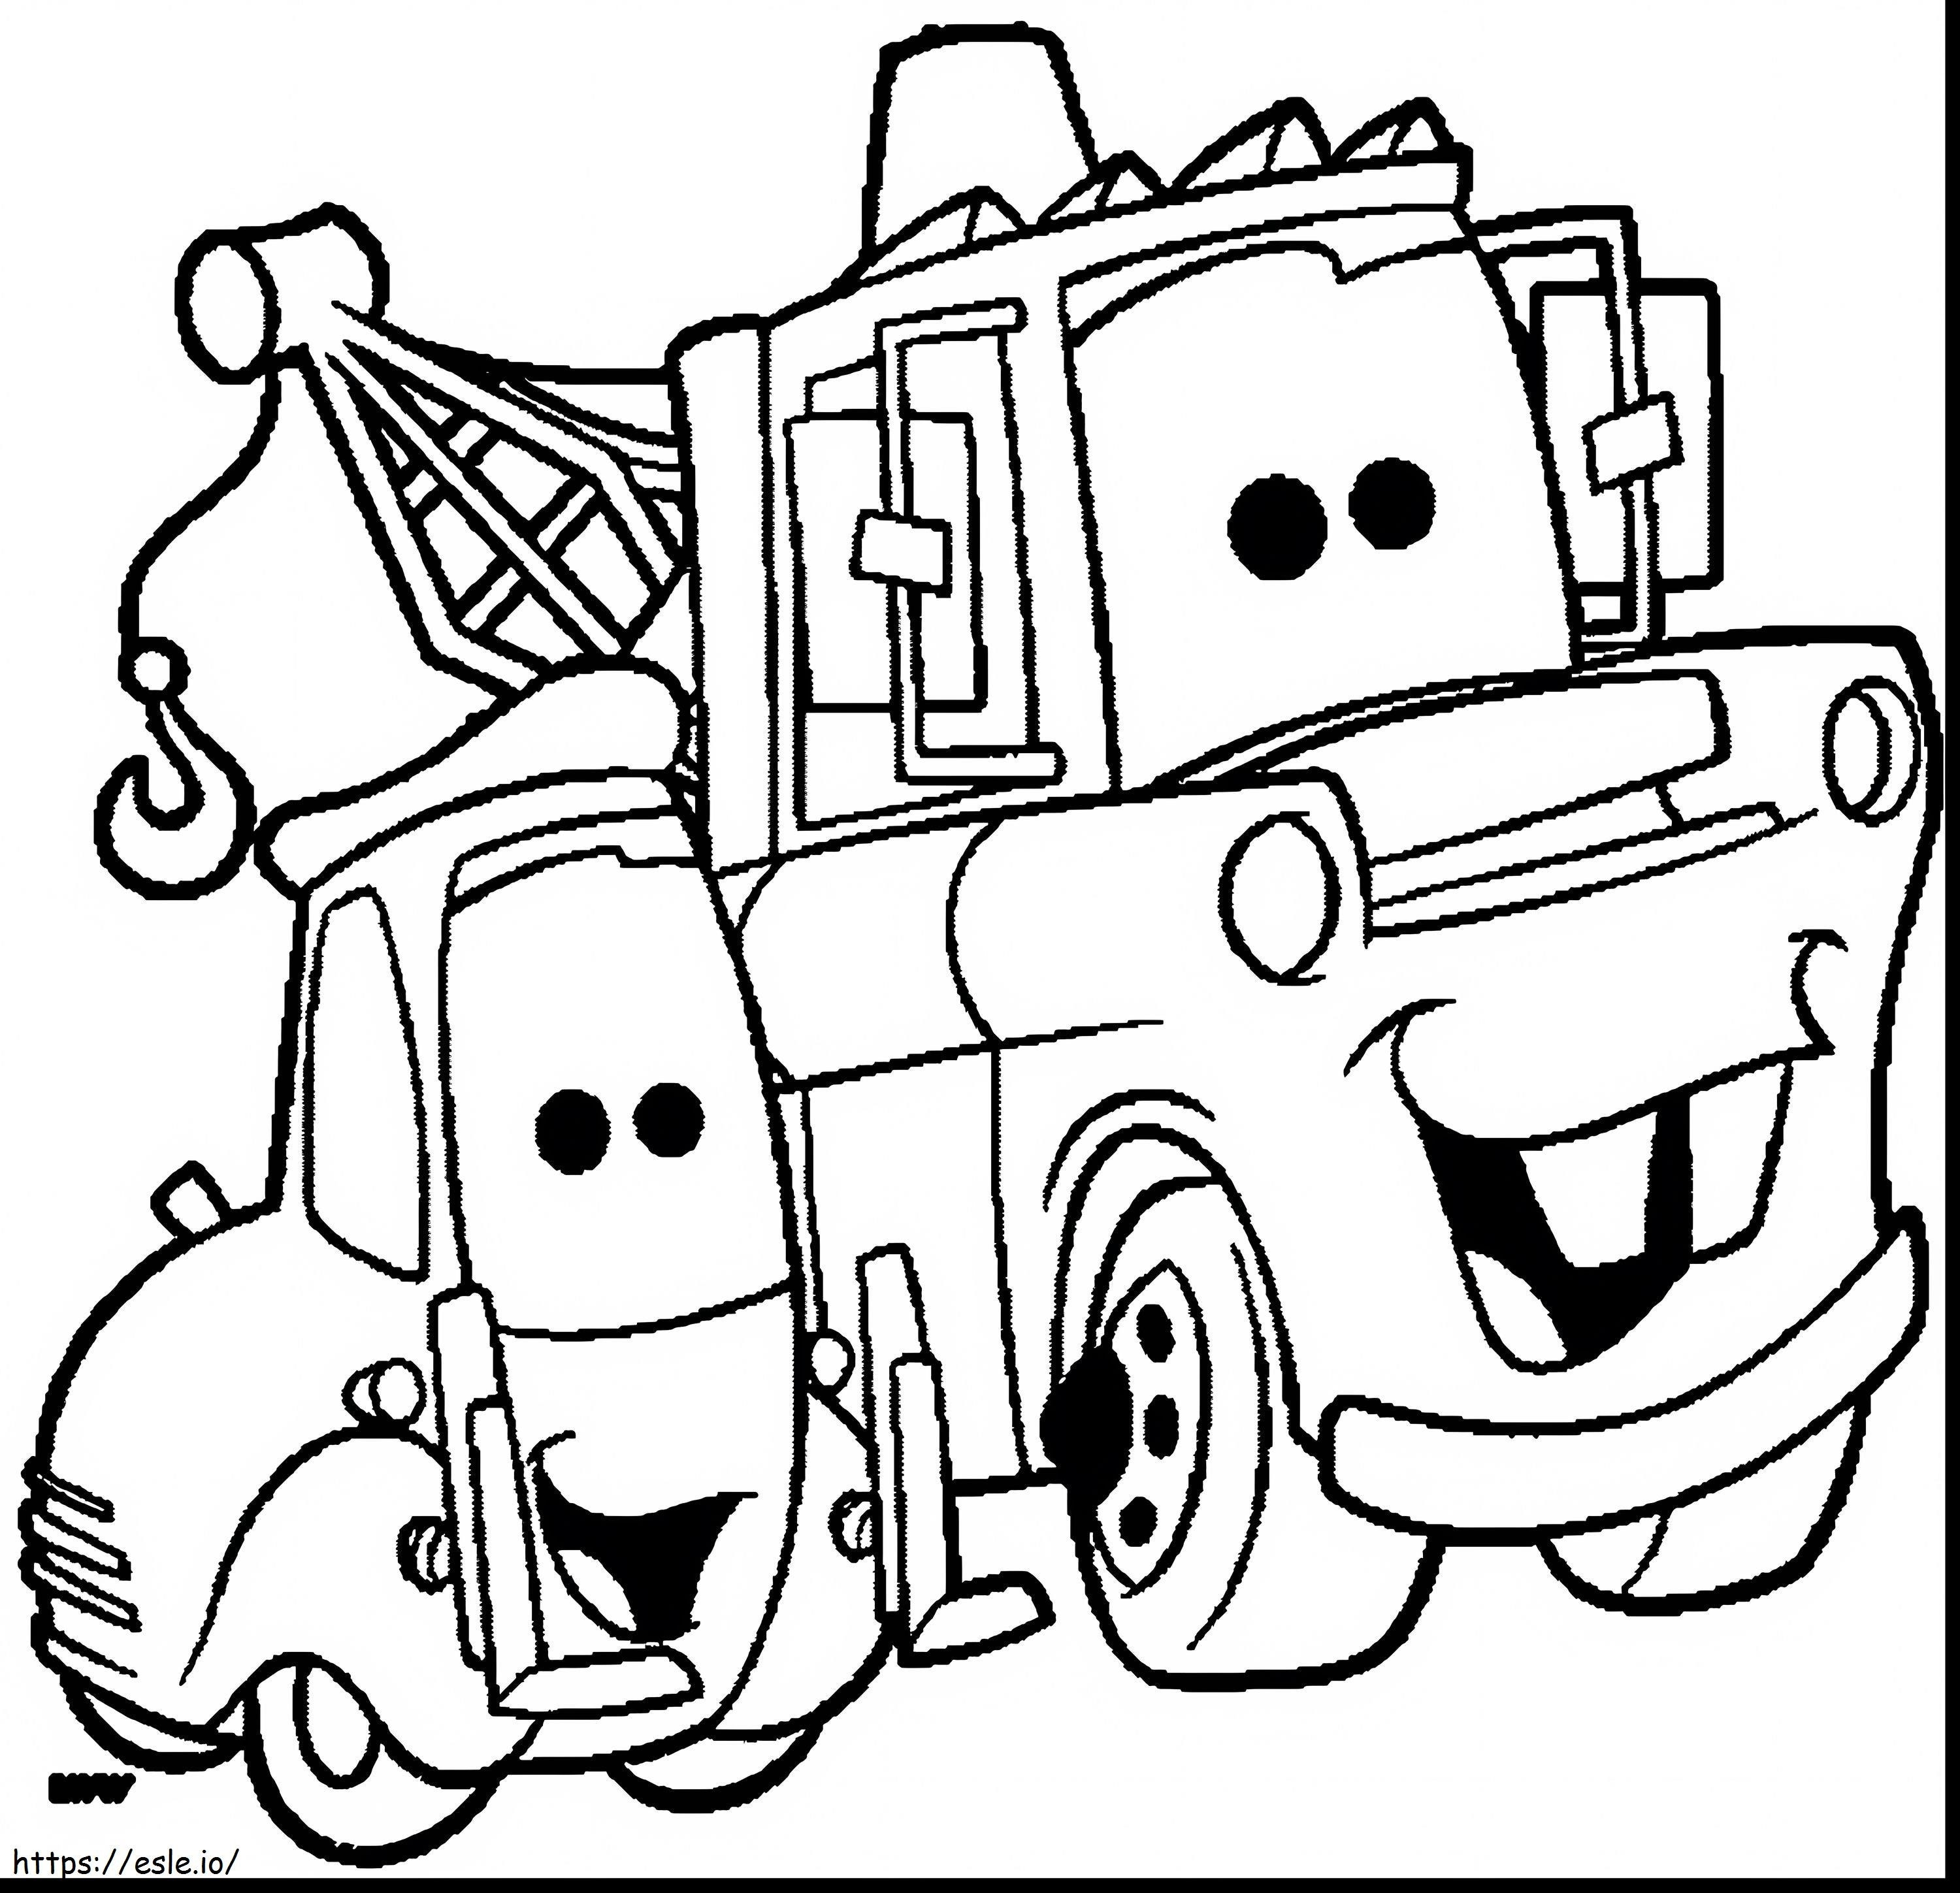  Master Chief Free Mater Tow Sheets Disney Maters Tall Tales Surprising Cars Picture Page para colorir